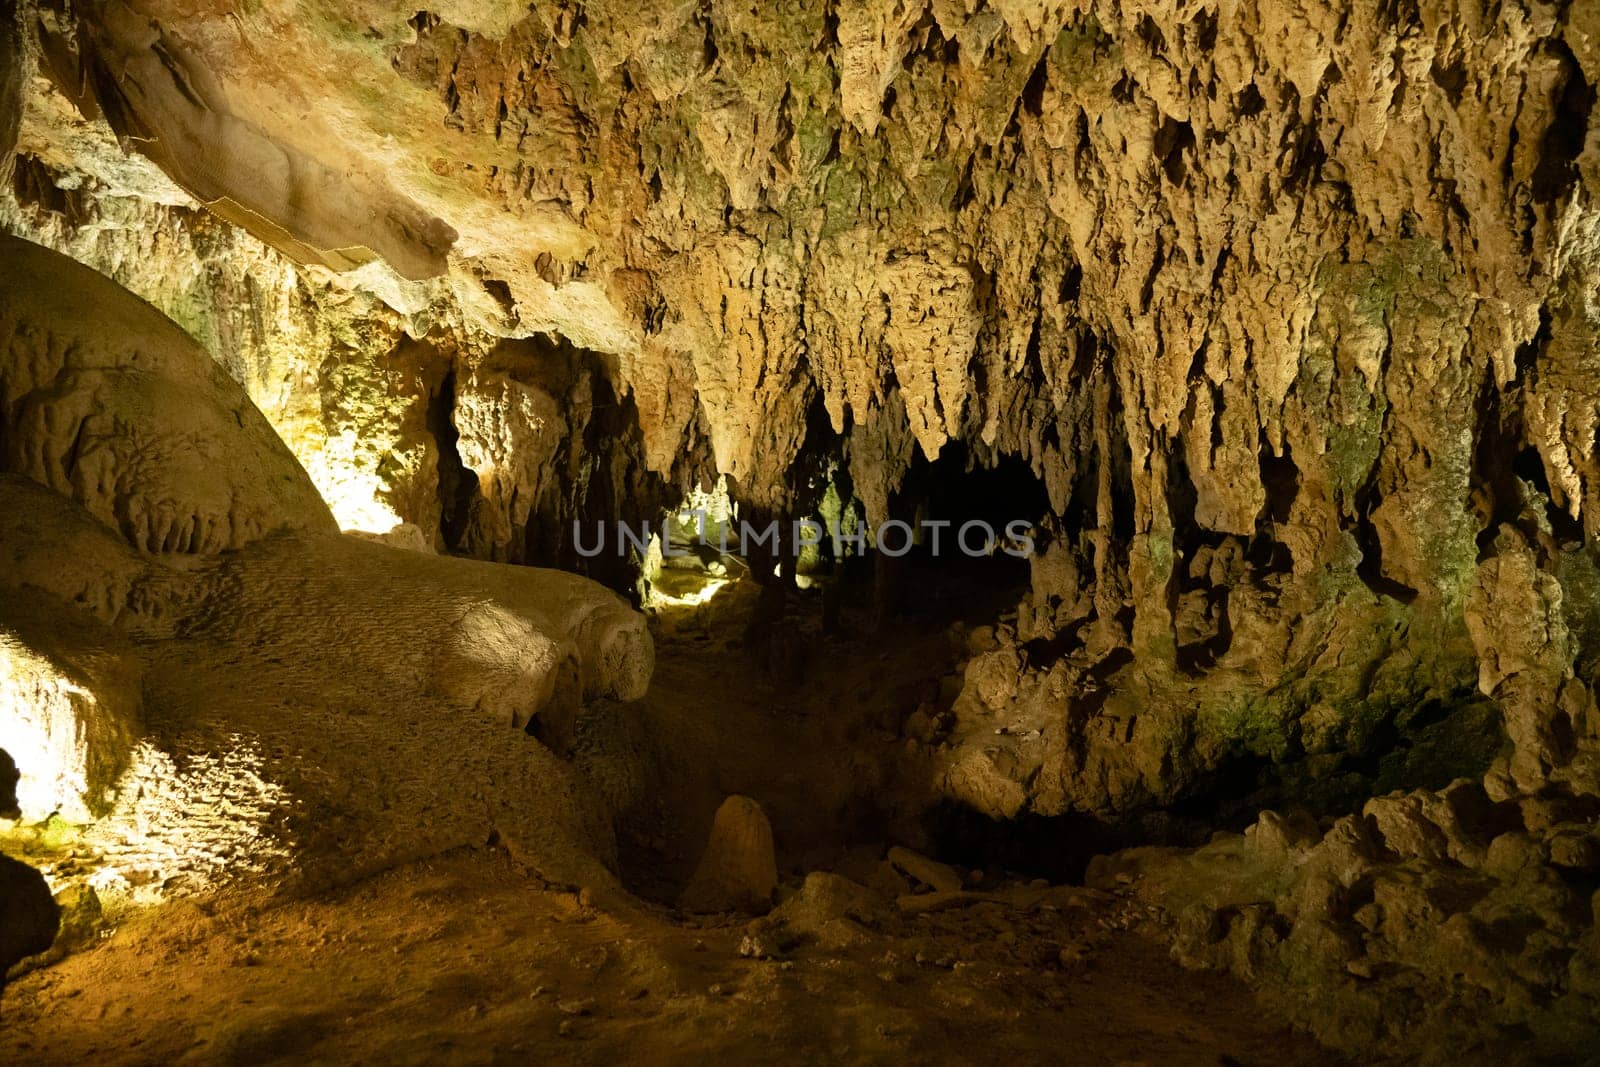 A cavern filled with limestone rocks formed by erosion, with soda straws, stalagmites, and stalactites illuminated by a shining light